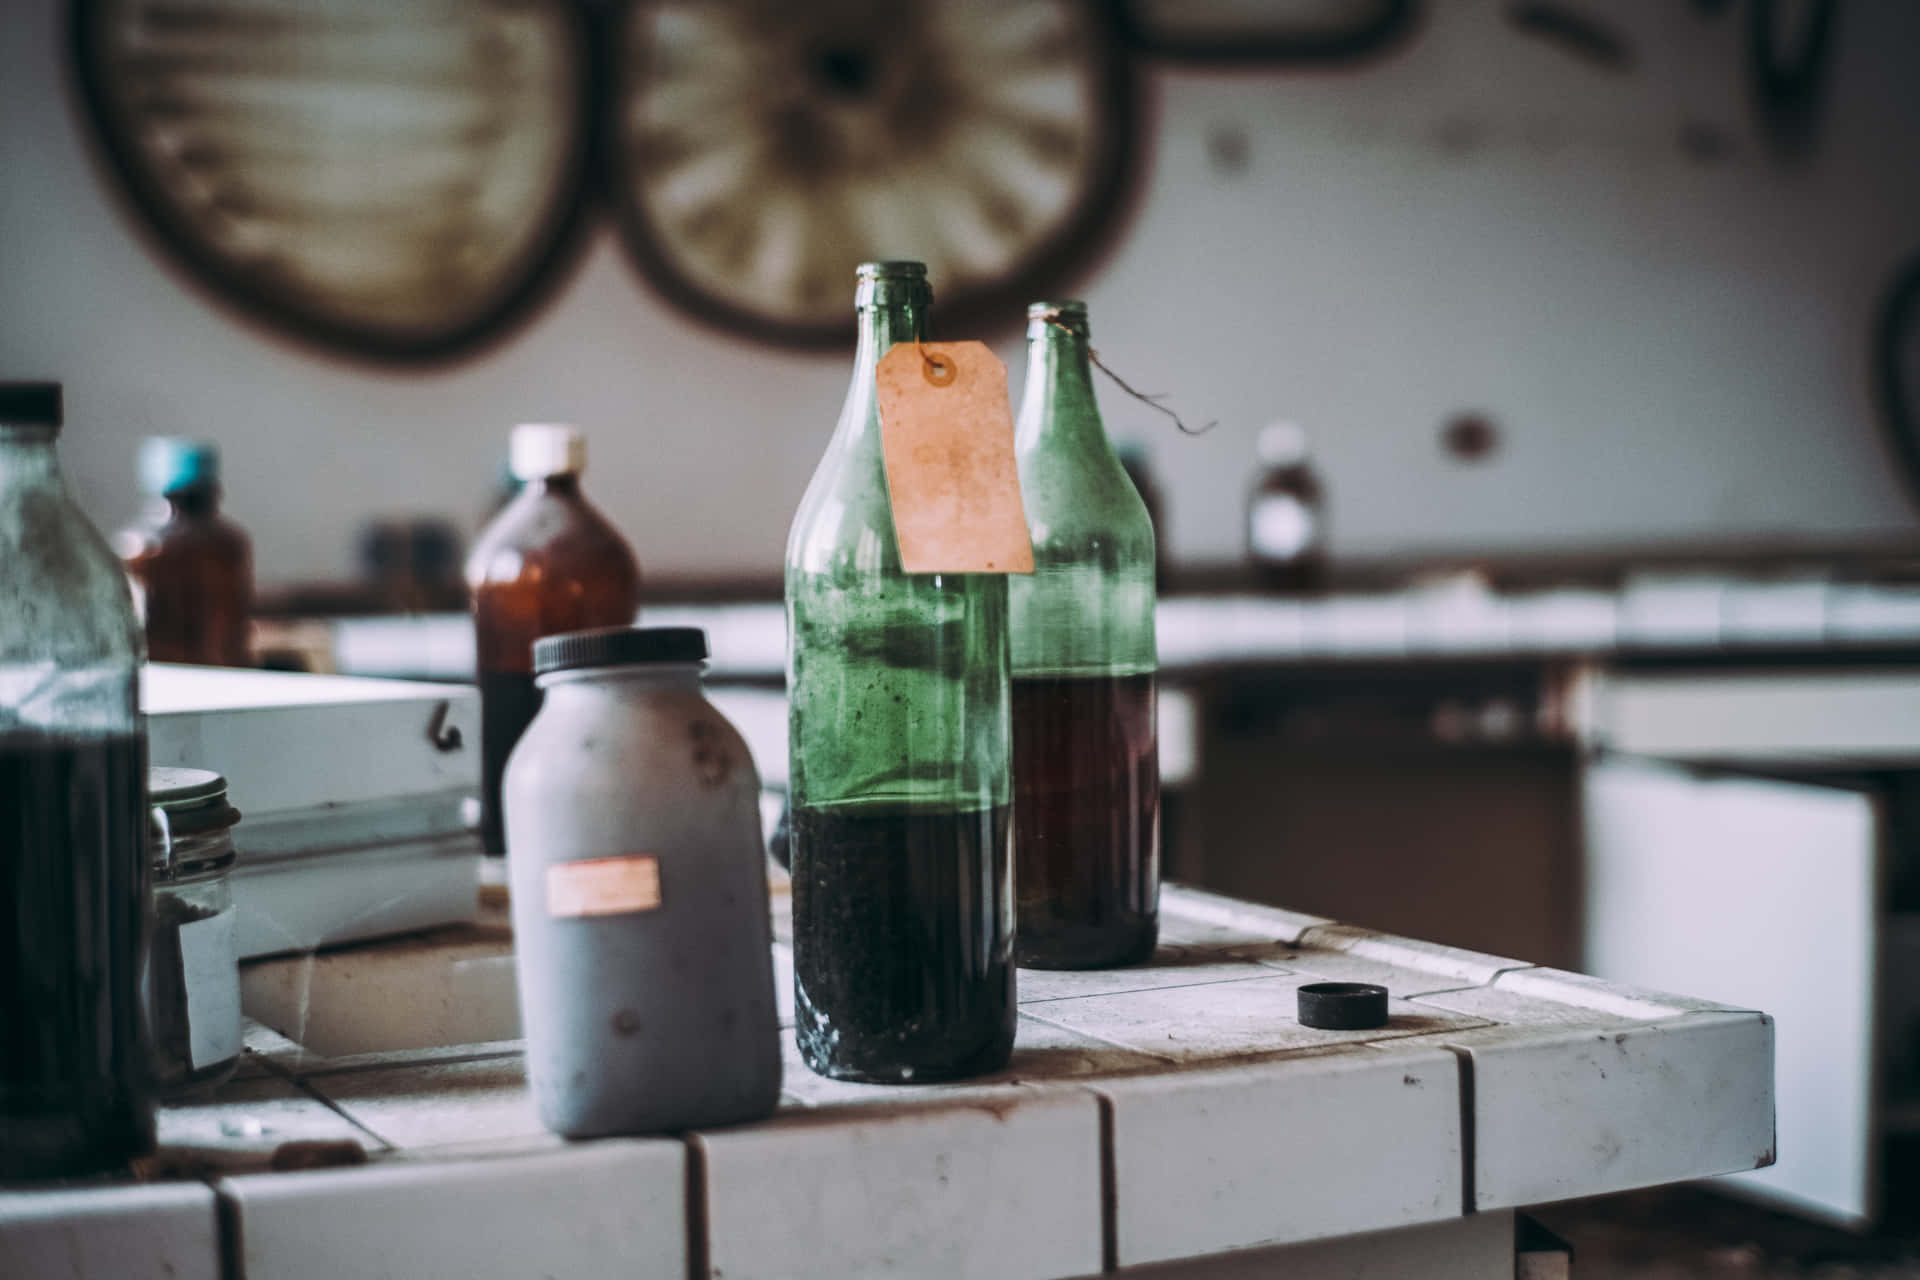 A Table With Bottles And Other Items On It